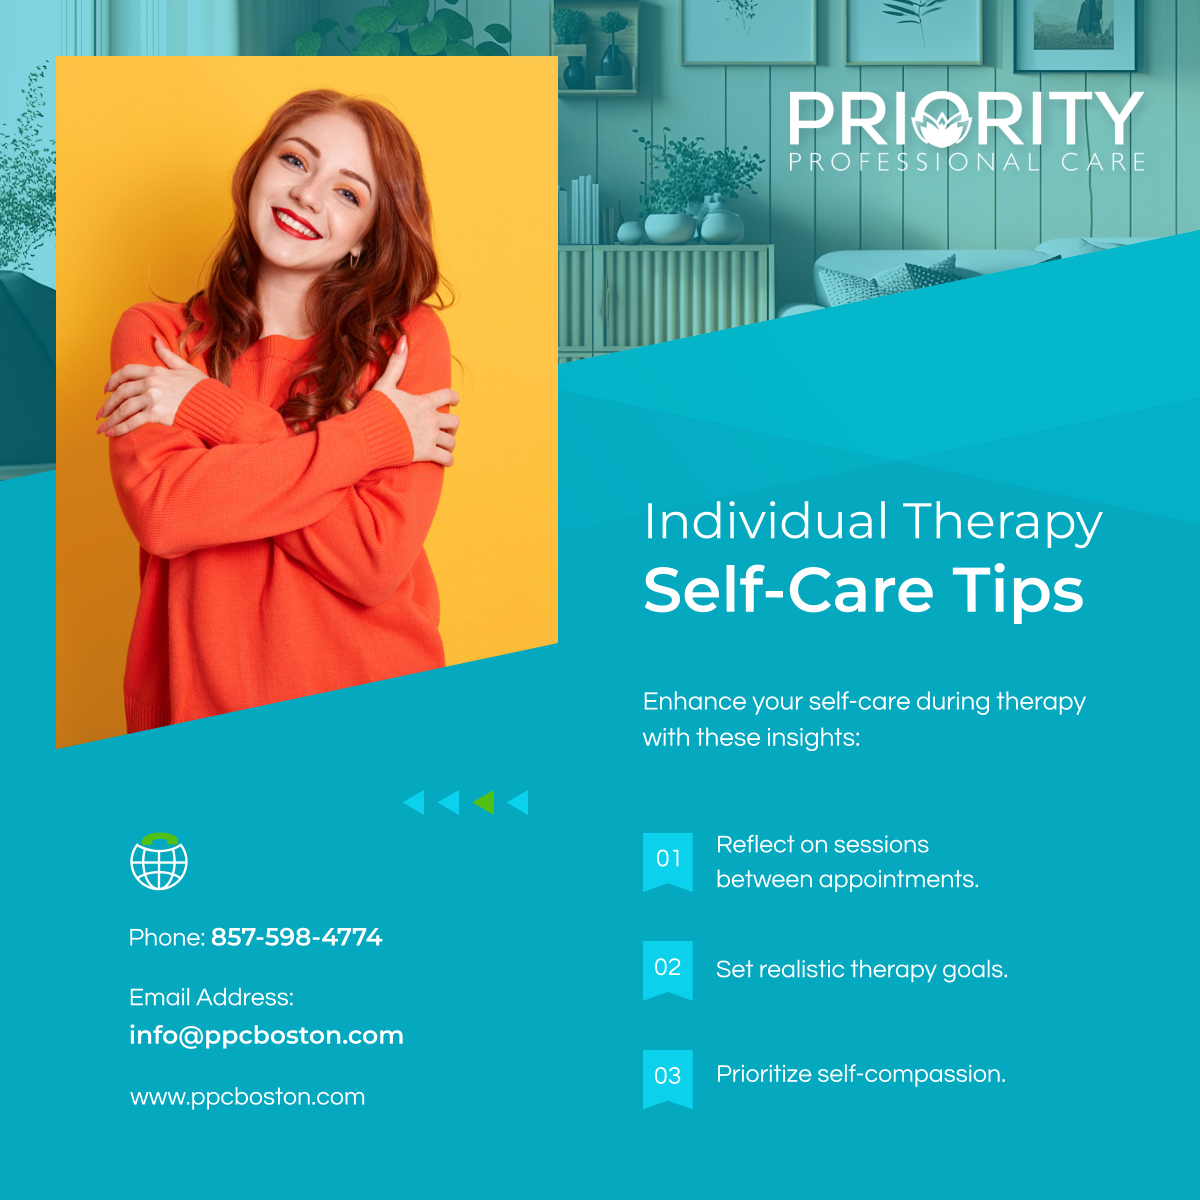 Your well-being matters on the transformative path of individual therapy. Enhance your journey with these self-care suggestions, cultivating a stronger bond with yourself and the therapeutic journey.

#IndividualTherapy #CaregiverSupport #MentalHealthMatters #TrainingTuesday